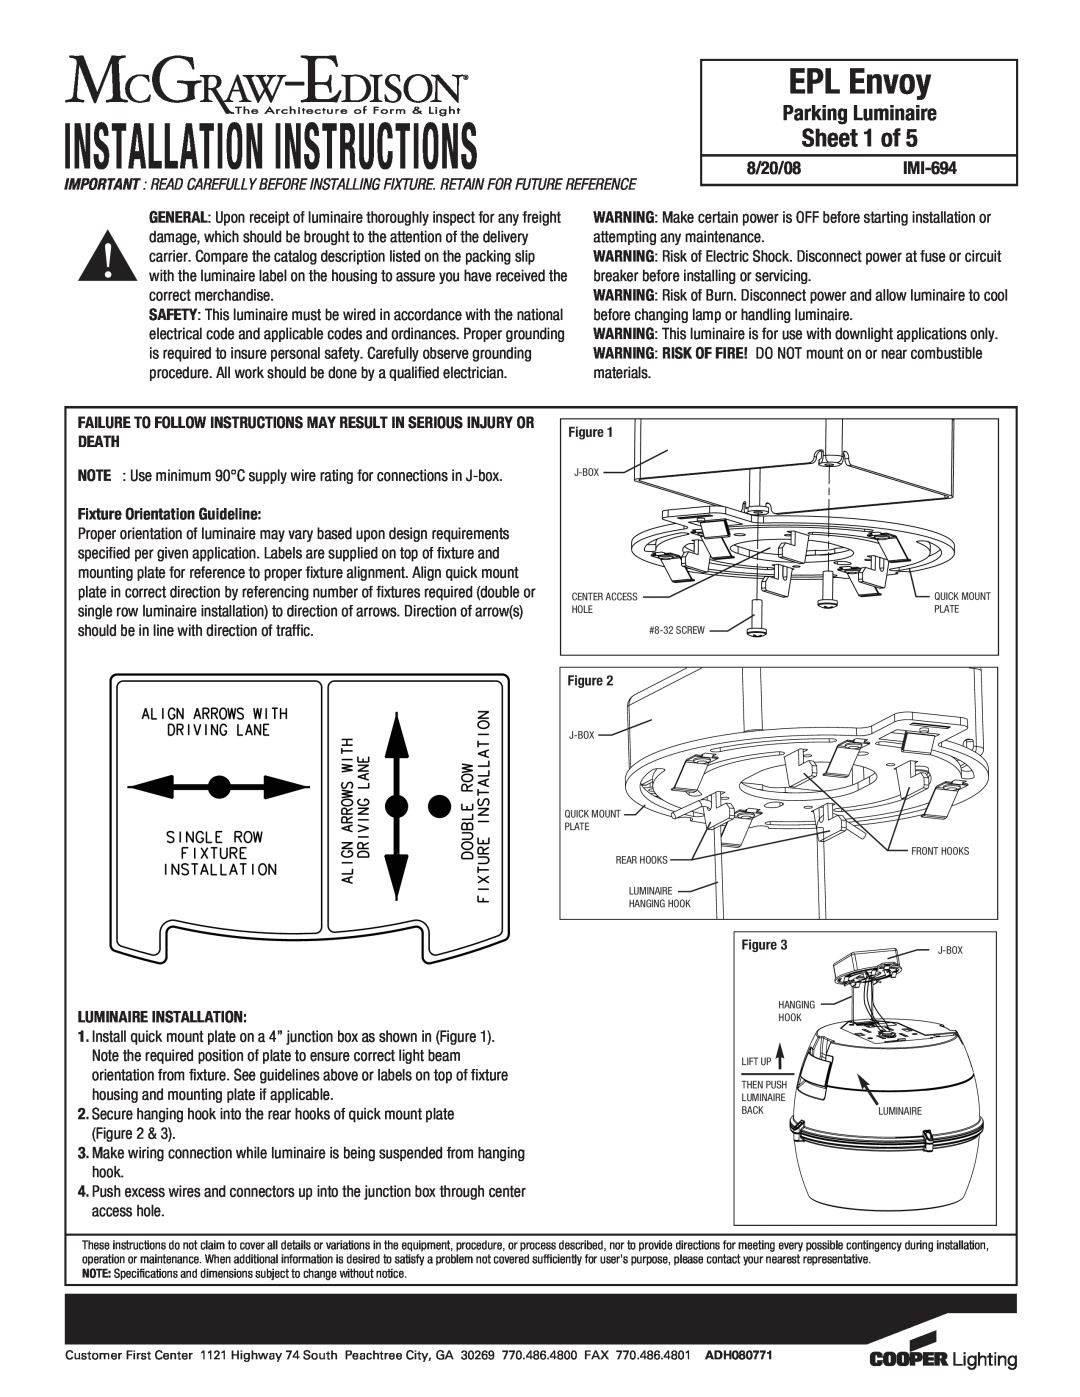 Cooper Lighting specifications Installation Instructions, EPL Envoy, Sheet 1 of, Parking Luminaire, 8/20/08IMI-694 